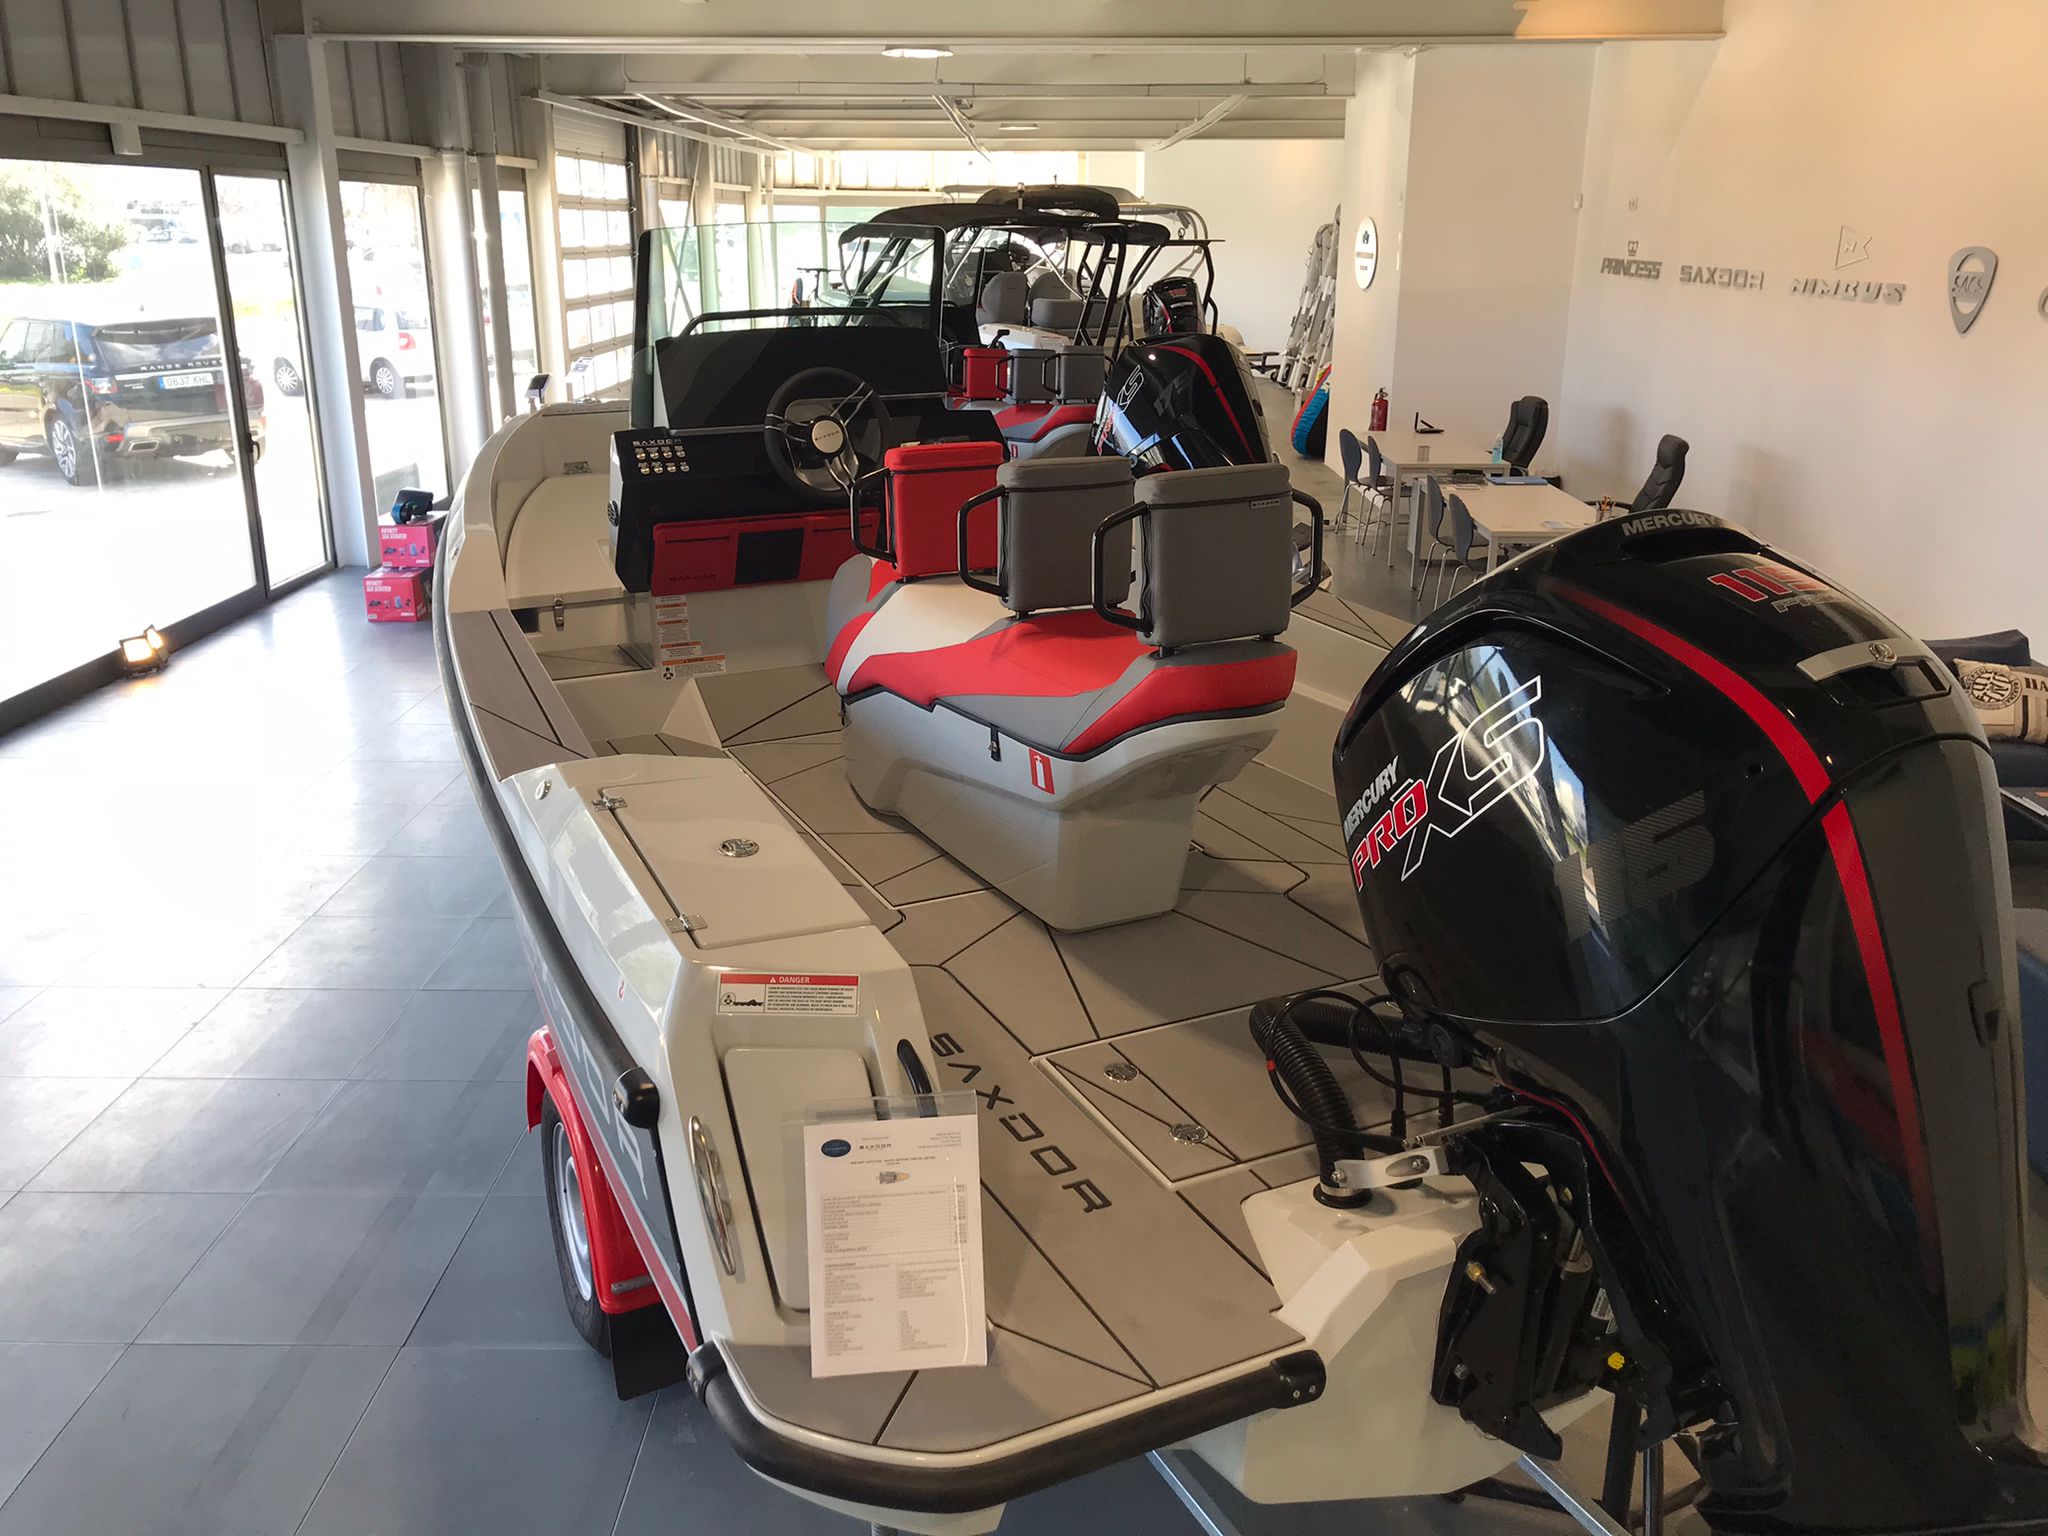 New 2021 Saxdor 200 Sport for sale in Menorca - Clearwater Marine